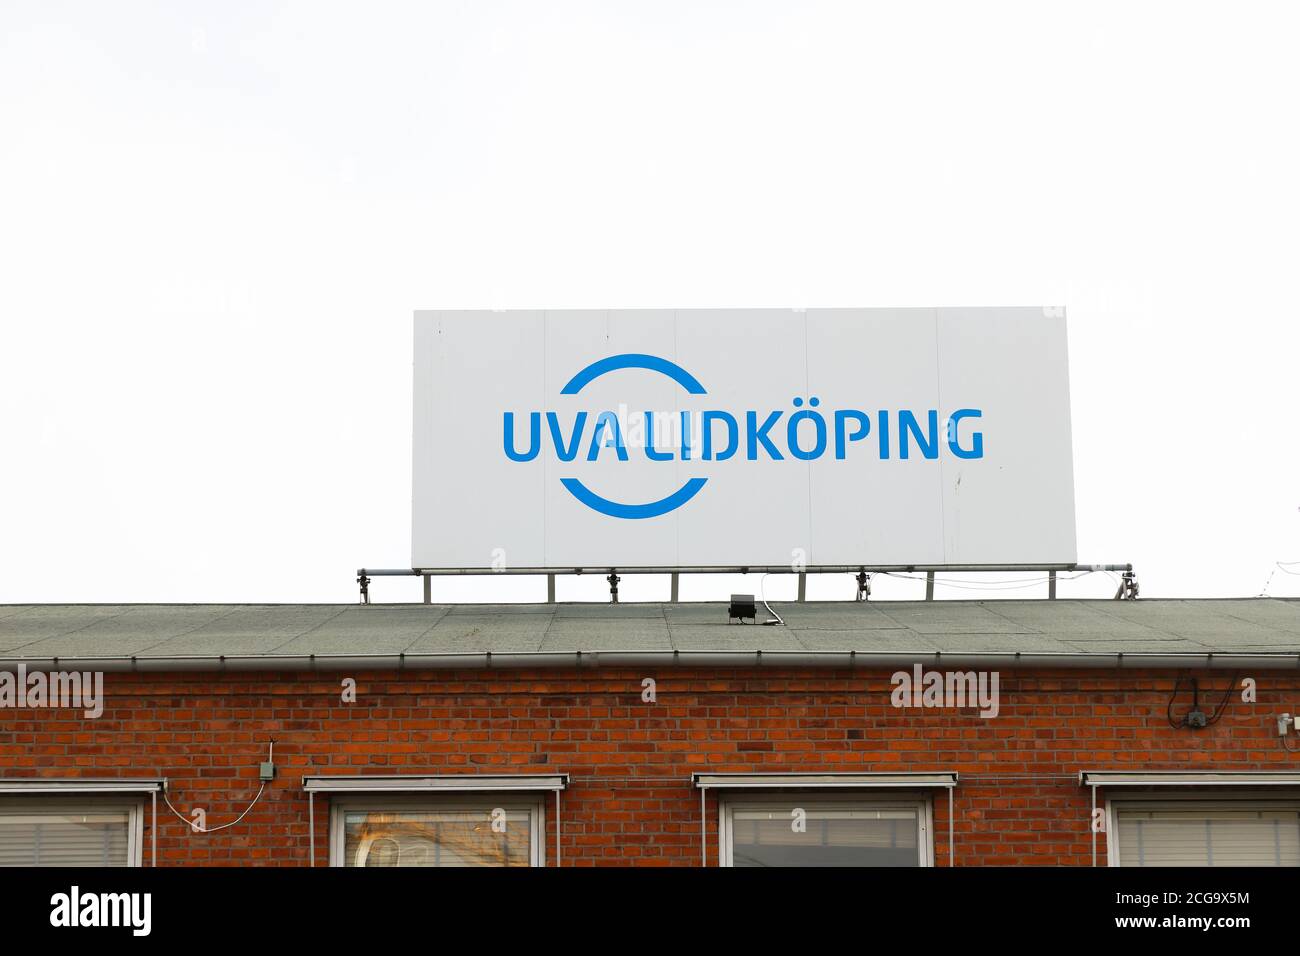 Lidkoping, Sweden - June 24, 2020: Roof top sign for the UVA Lidkoping a worldwide leading global supplier of high precision grinding machines. Stock Photo